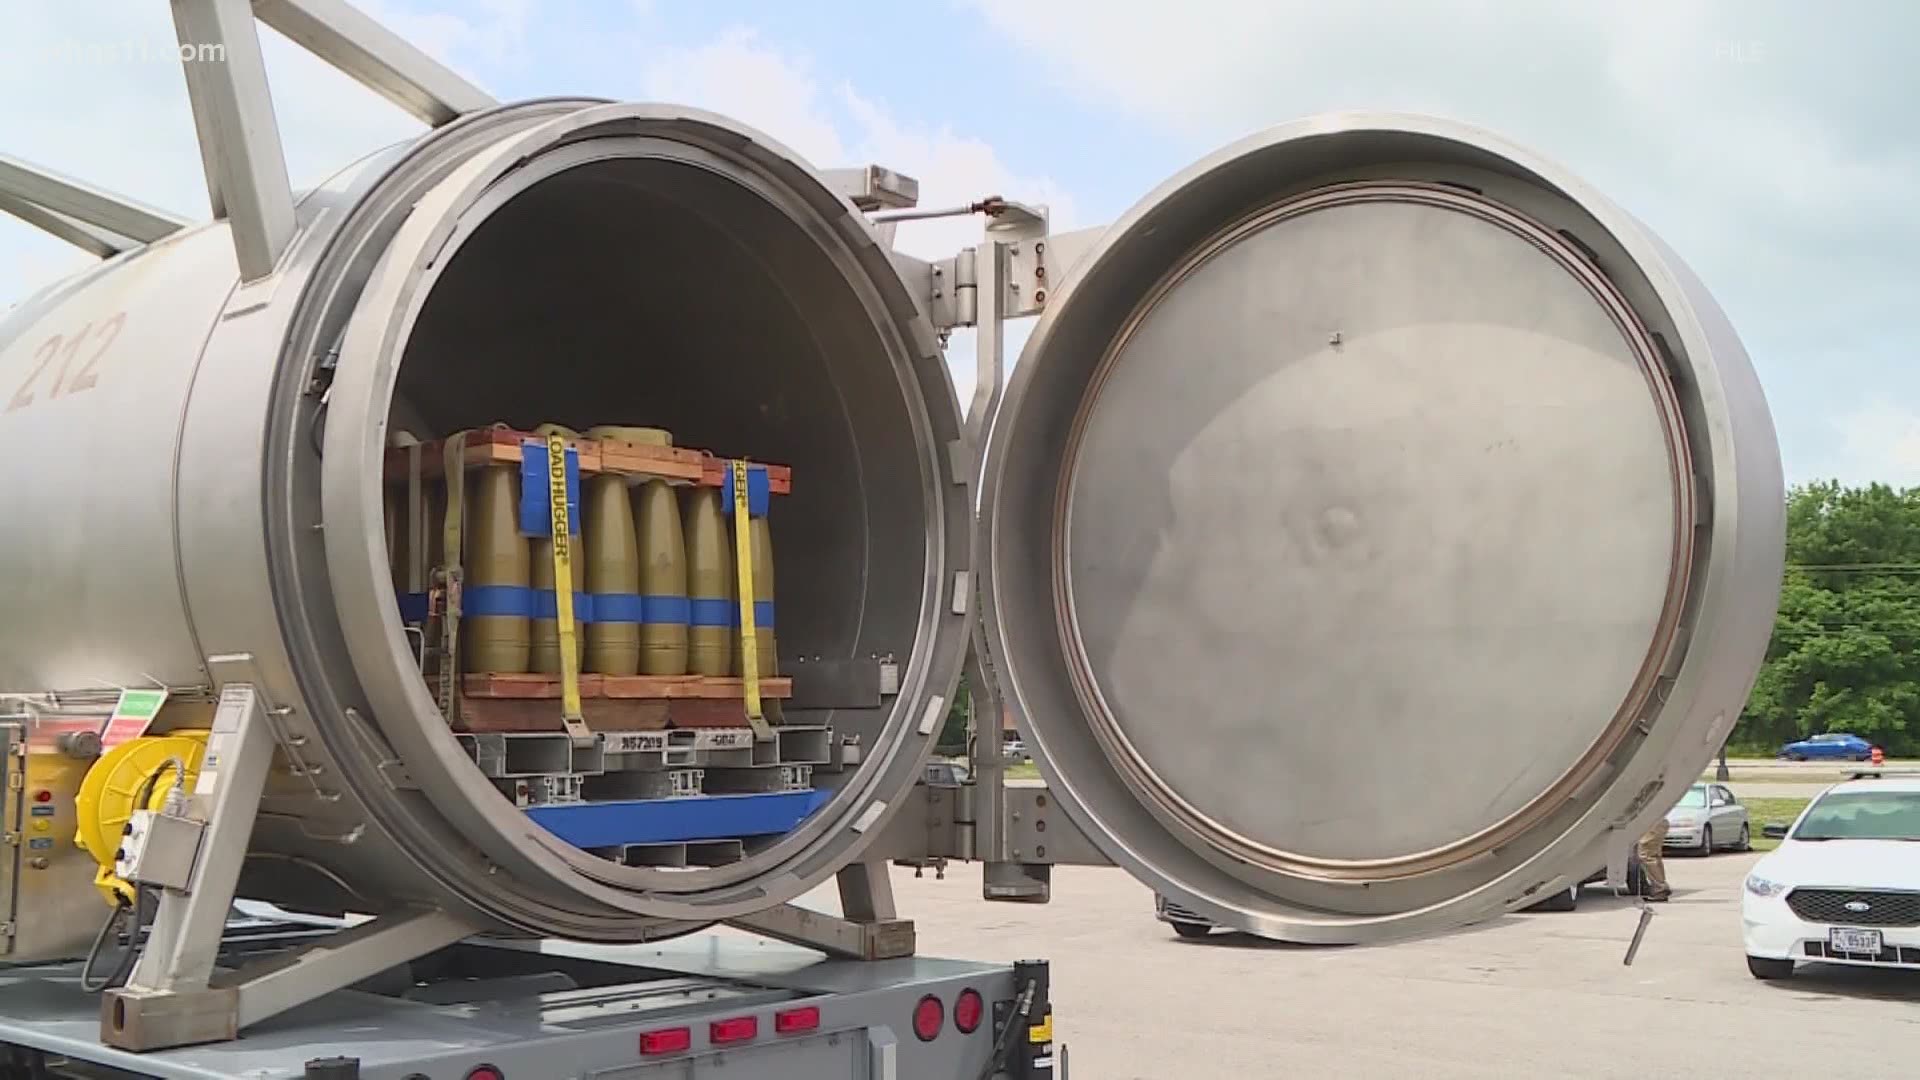 The Bluegrass Army Depot has had one of largest holdings of chemical nerve gas rockets in the entire U.S. for decades.